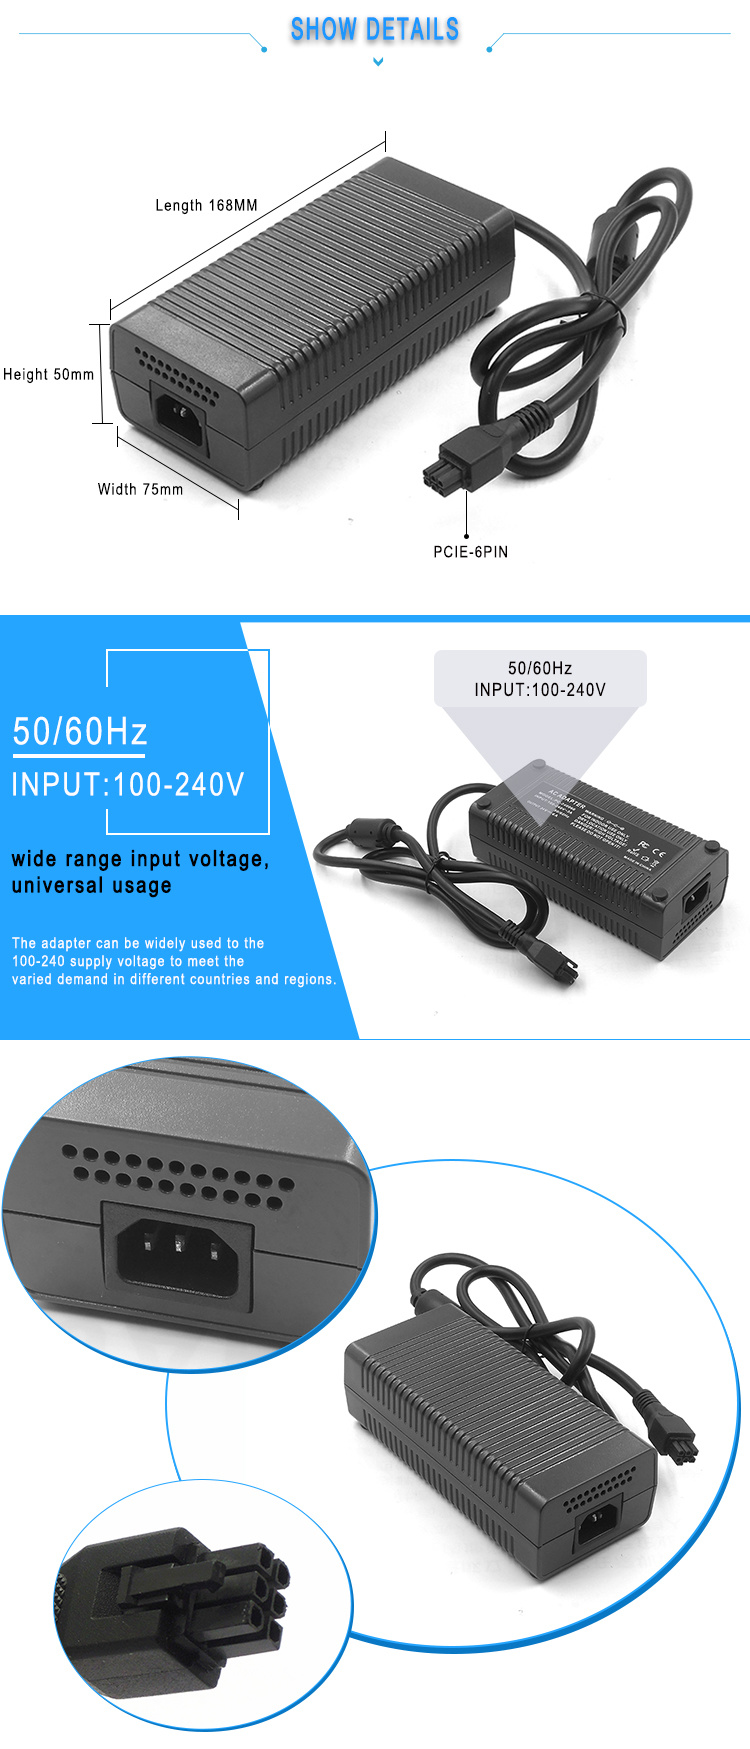 24V switching power supply 5.4A 130W AC DC power adapter for 3D printer